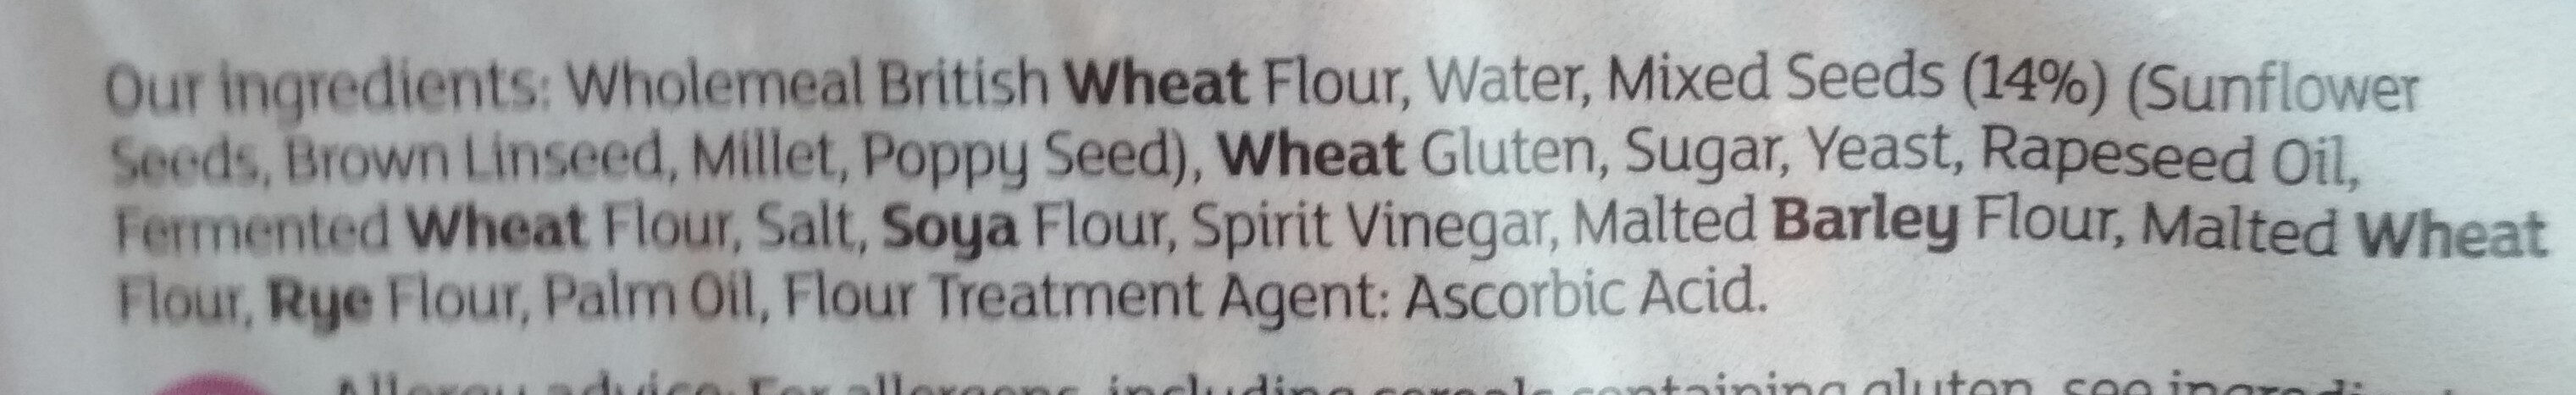 Multiseed Soft Wholemeal Farmhouse - Ingredients